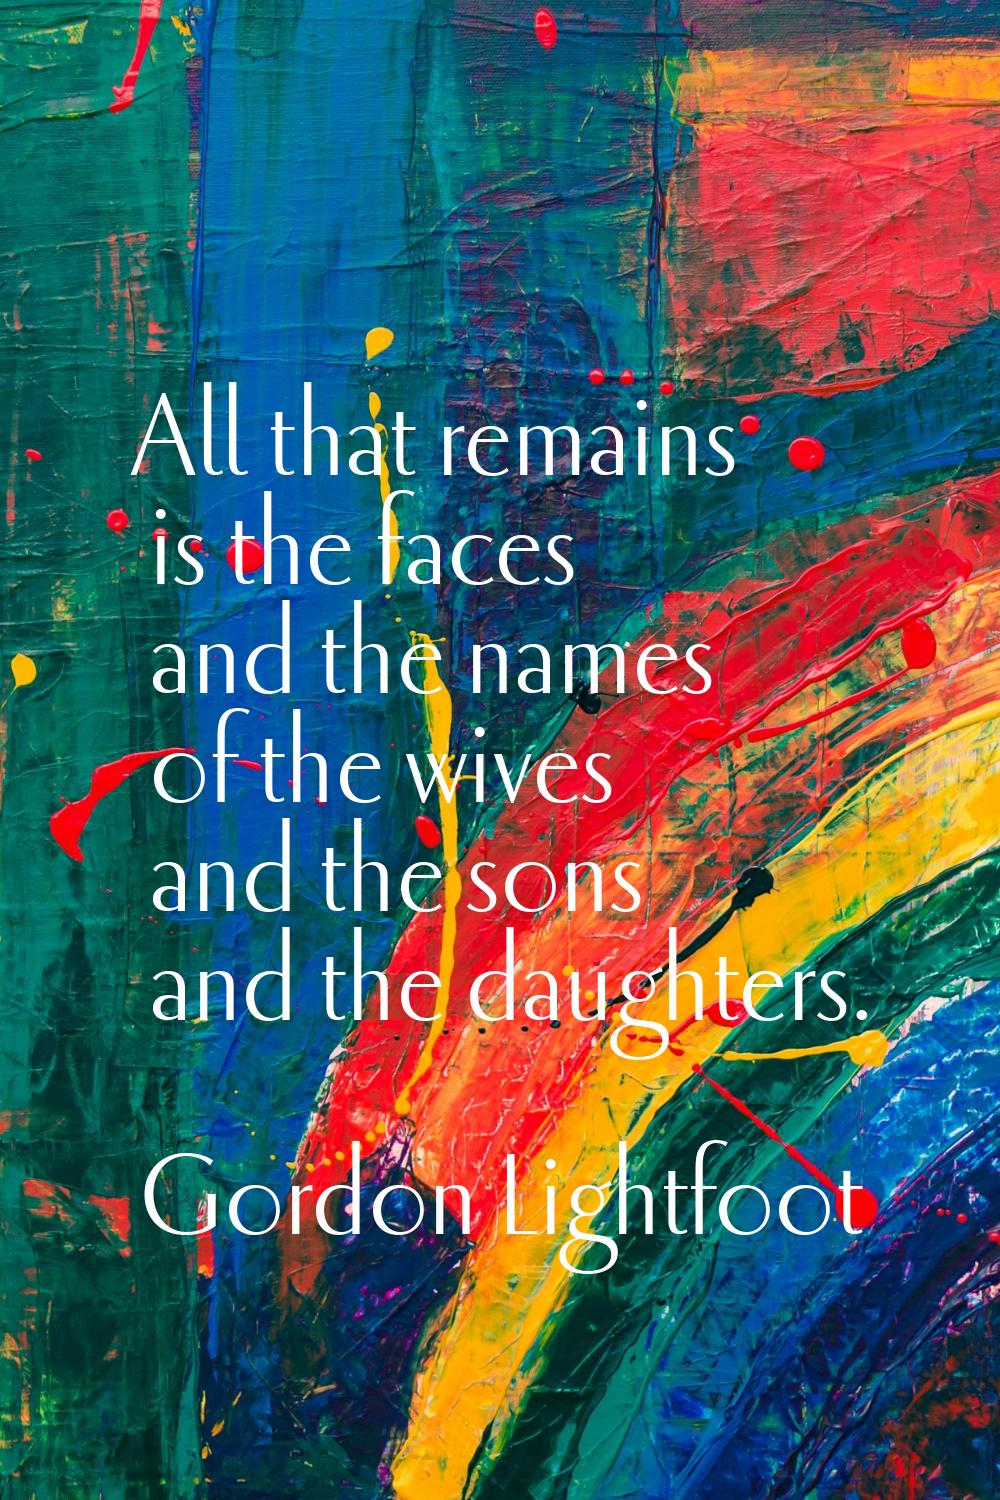 All that remains is the faces and the names of the wives and the sons and the daughters.